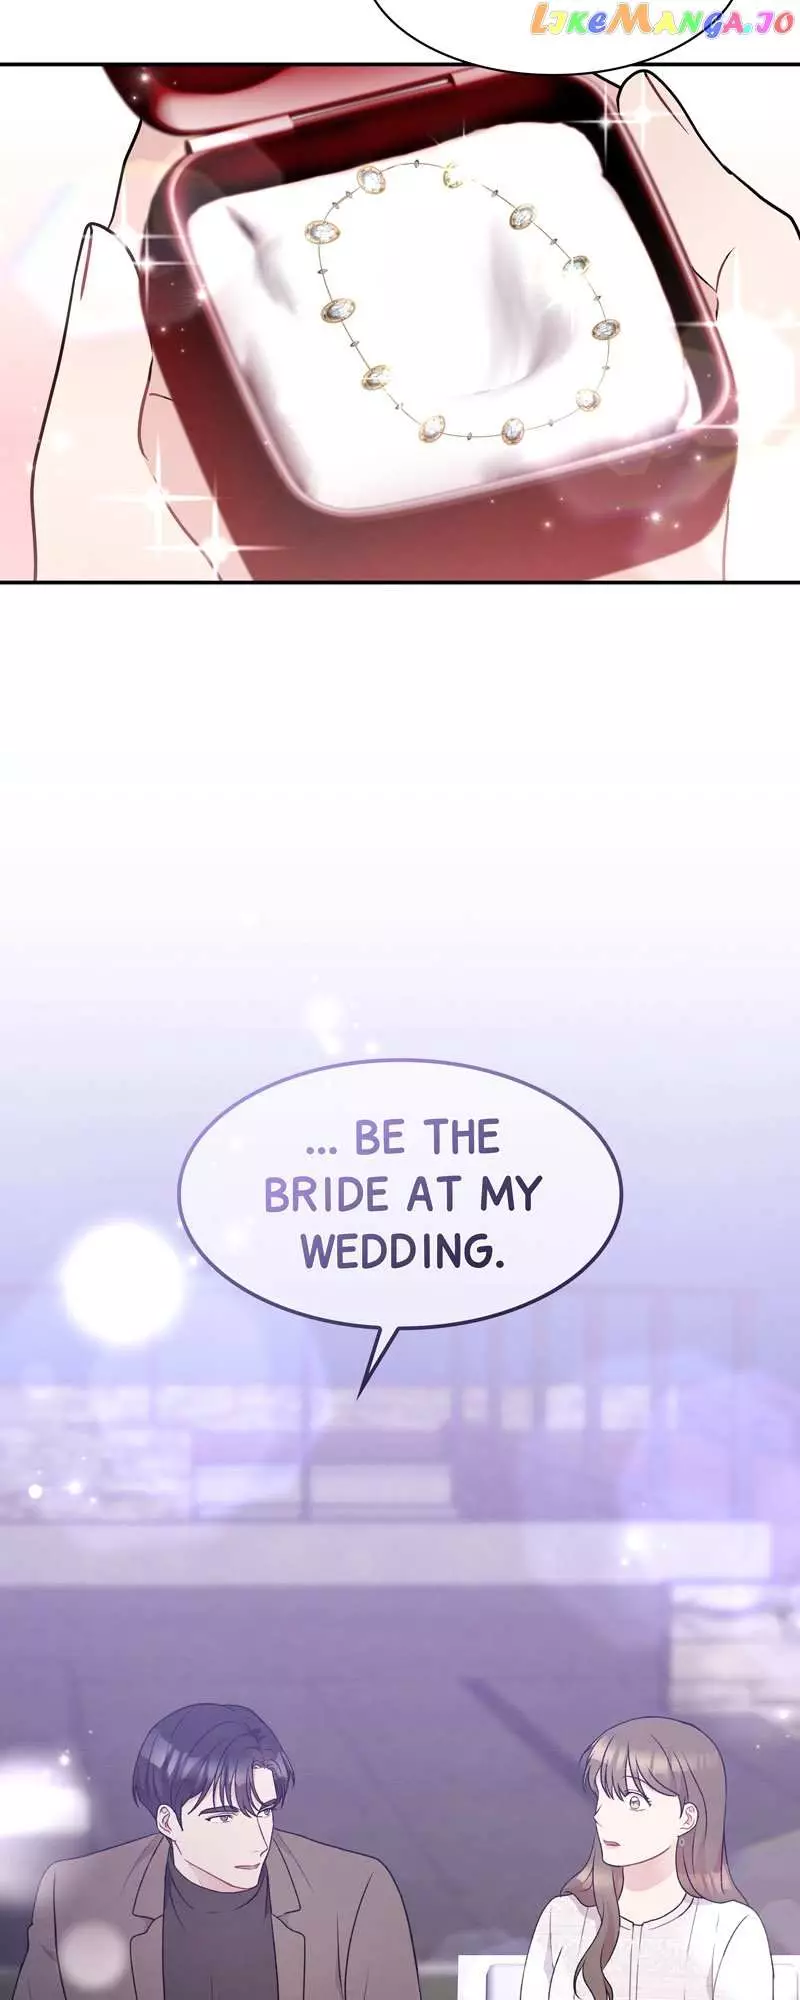 My Boss’S Perfect Wedding - 20 page 3-0139a676